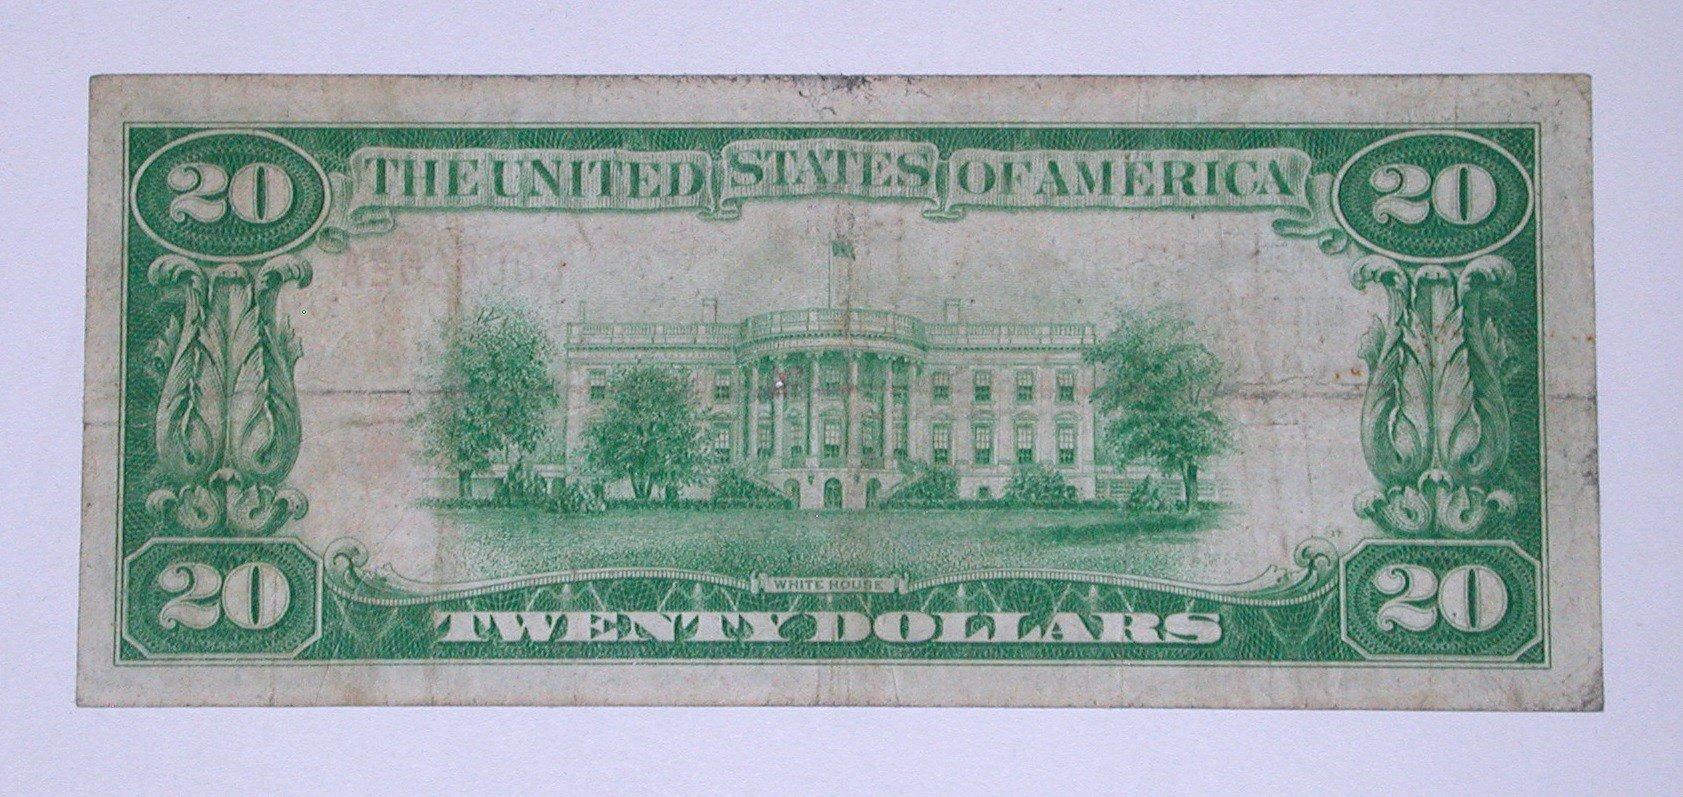 SERIES 1929 $20 NATIONAL CURRENCY - CHATTANOOGA, TN